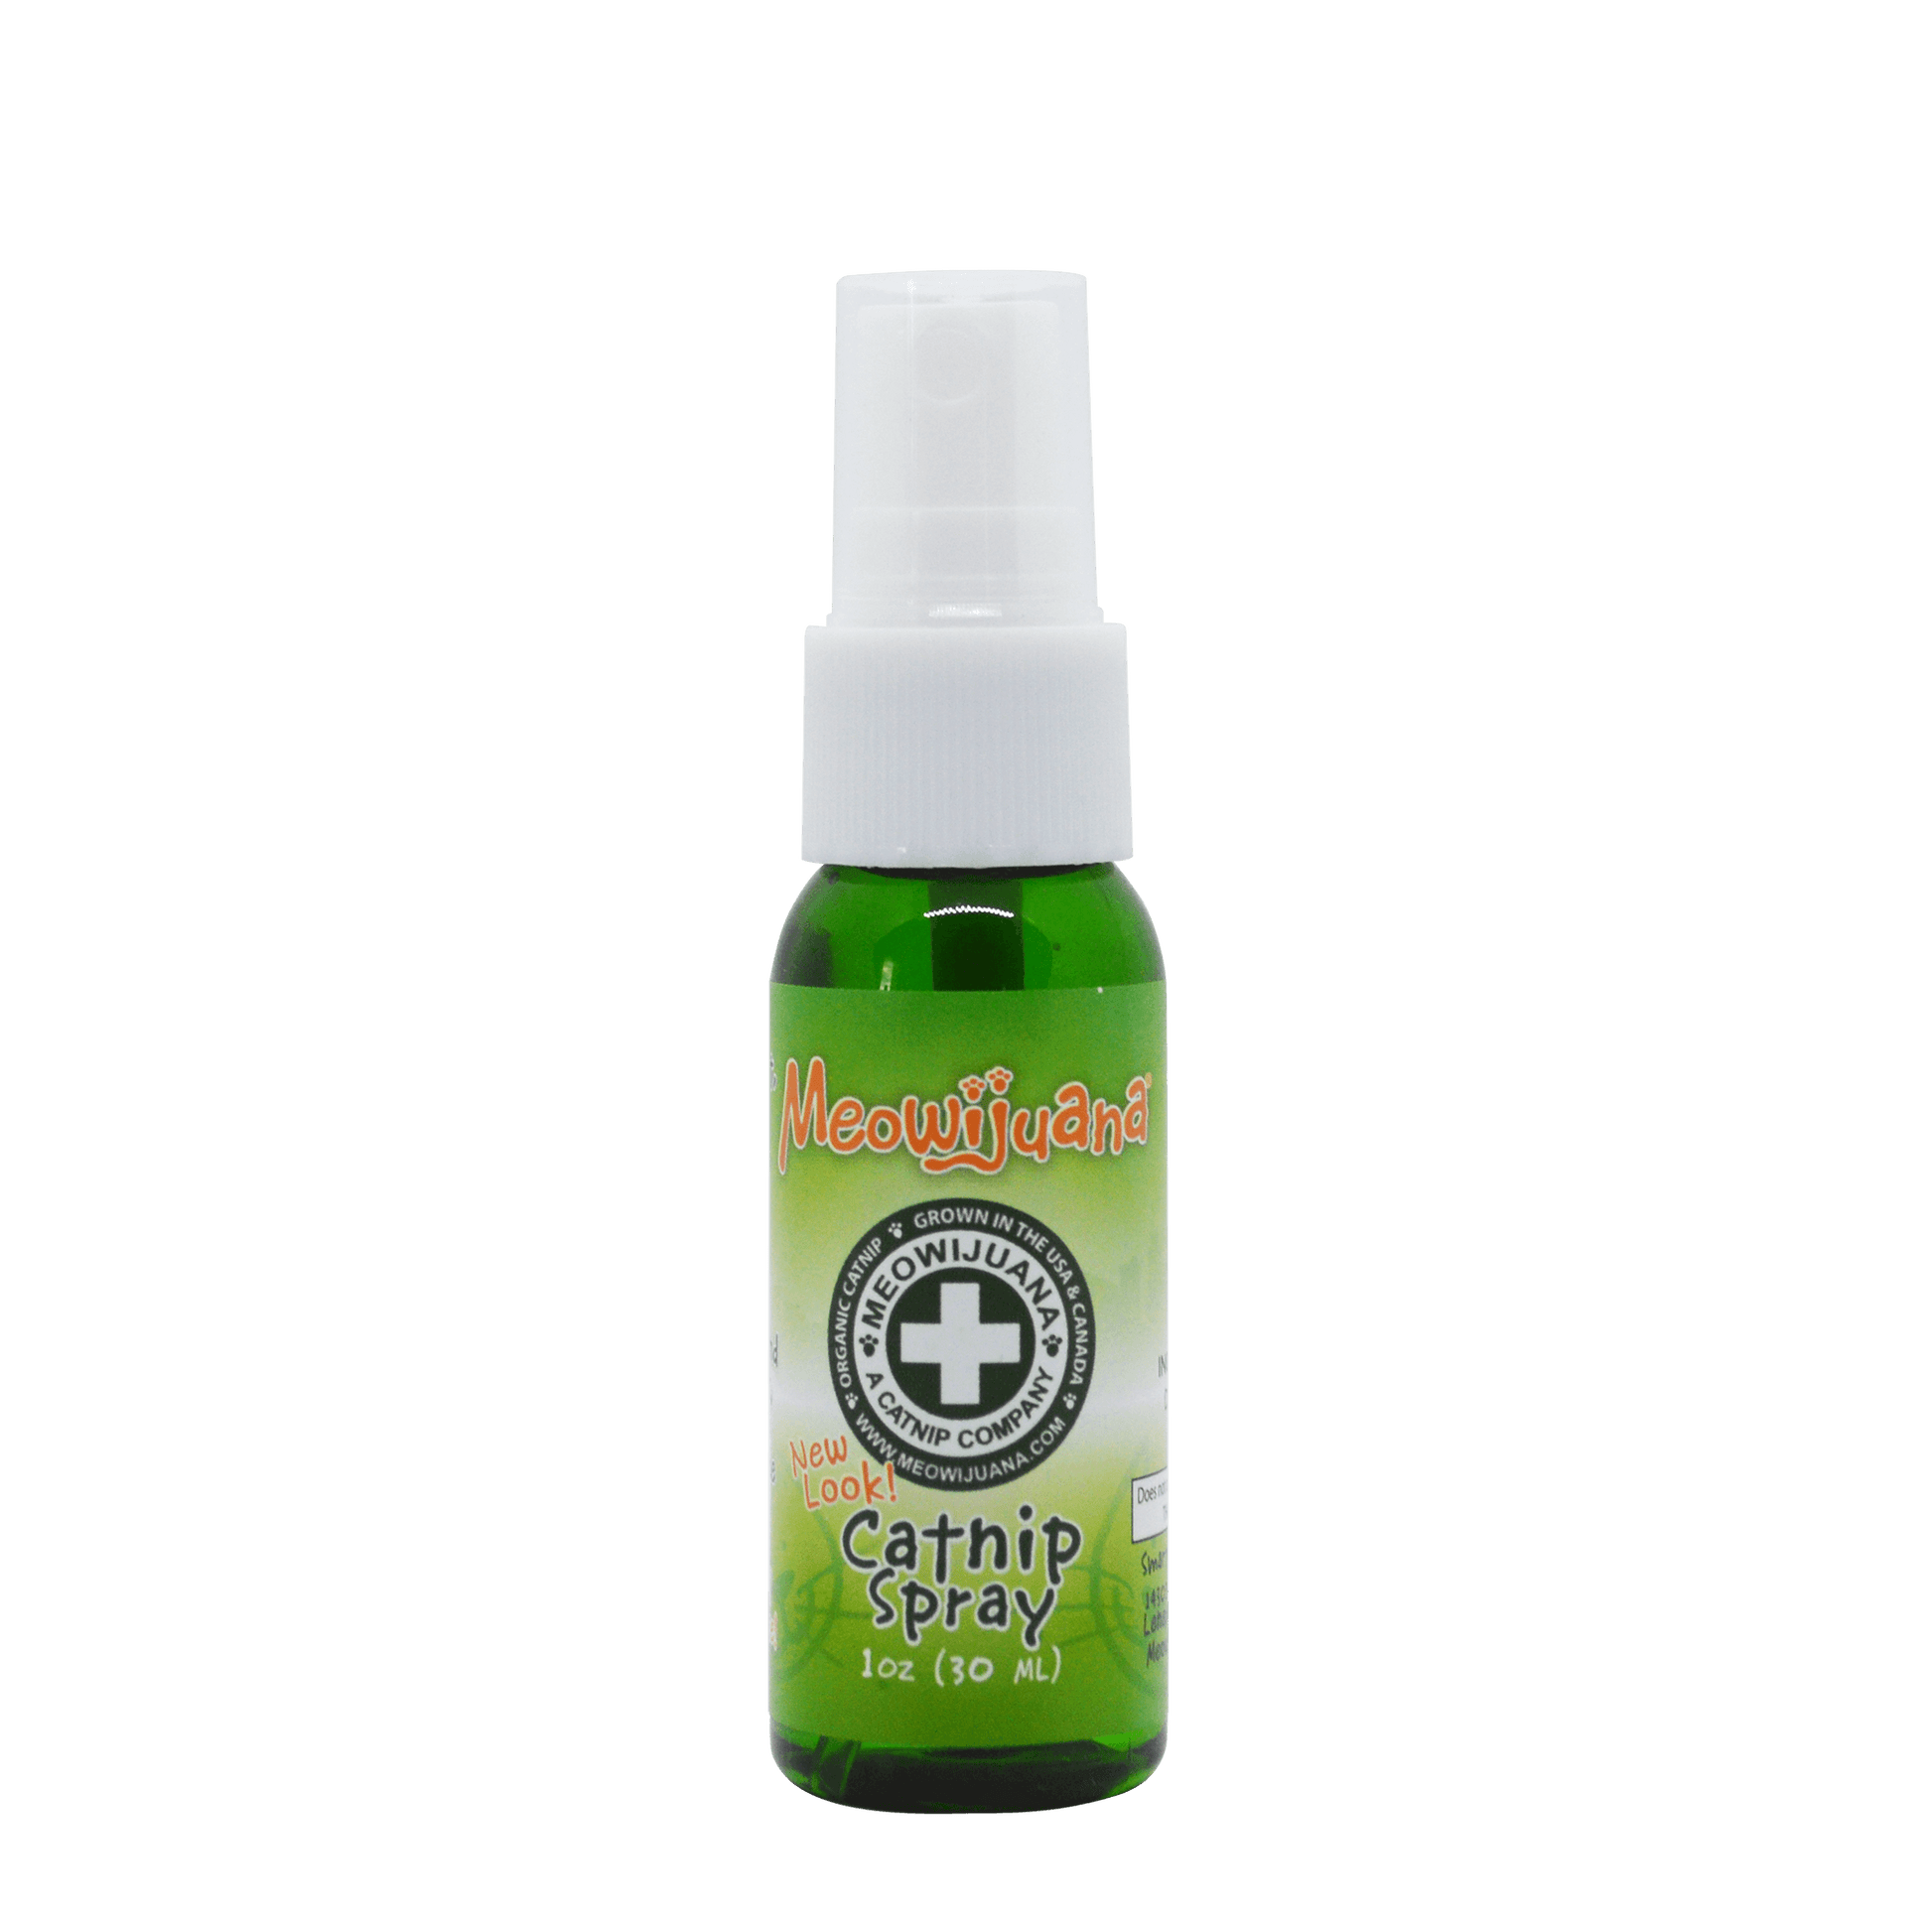 Natural Catnip Spray made in the USA